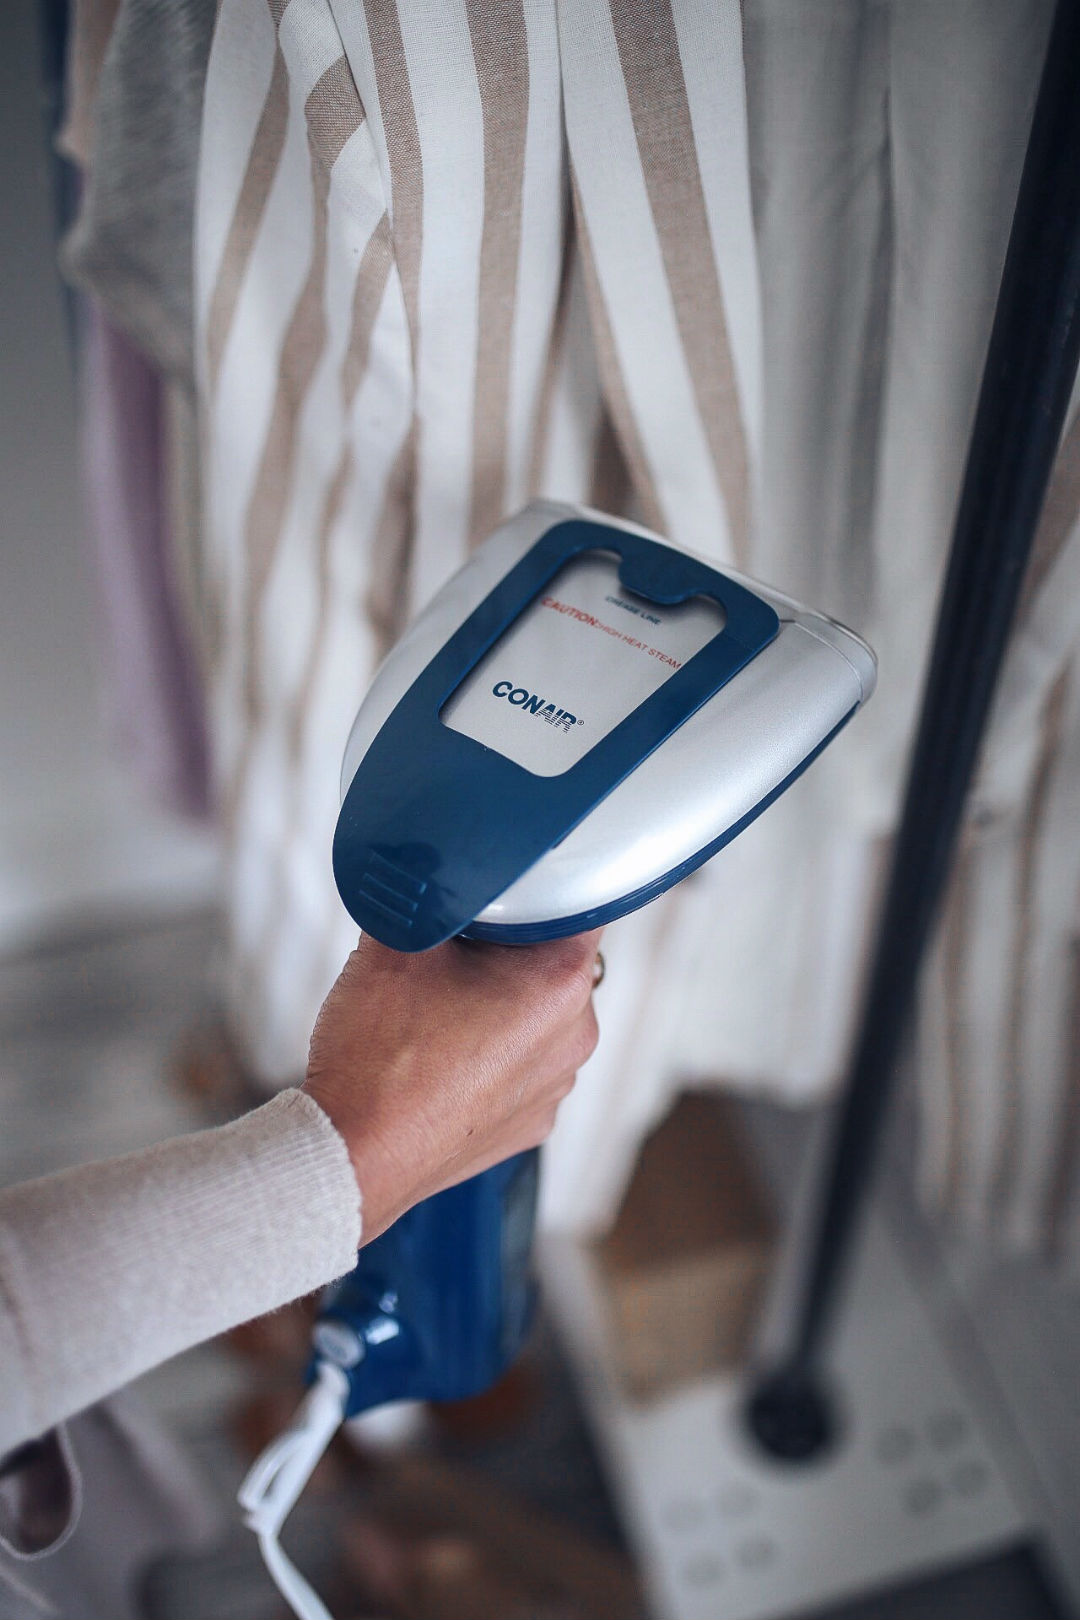 Blogger Sarah Lindner of The House of Sequins review on Conair Turbo ExtremeSteme Handheld Steamer. Best steamer for clothing and the home